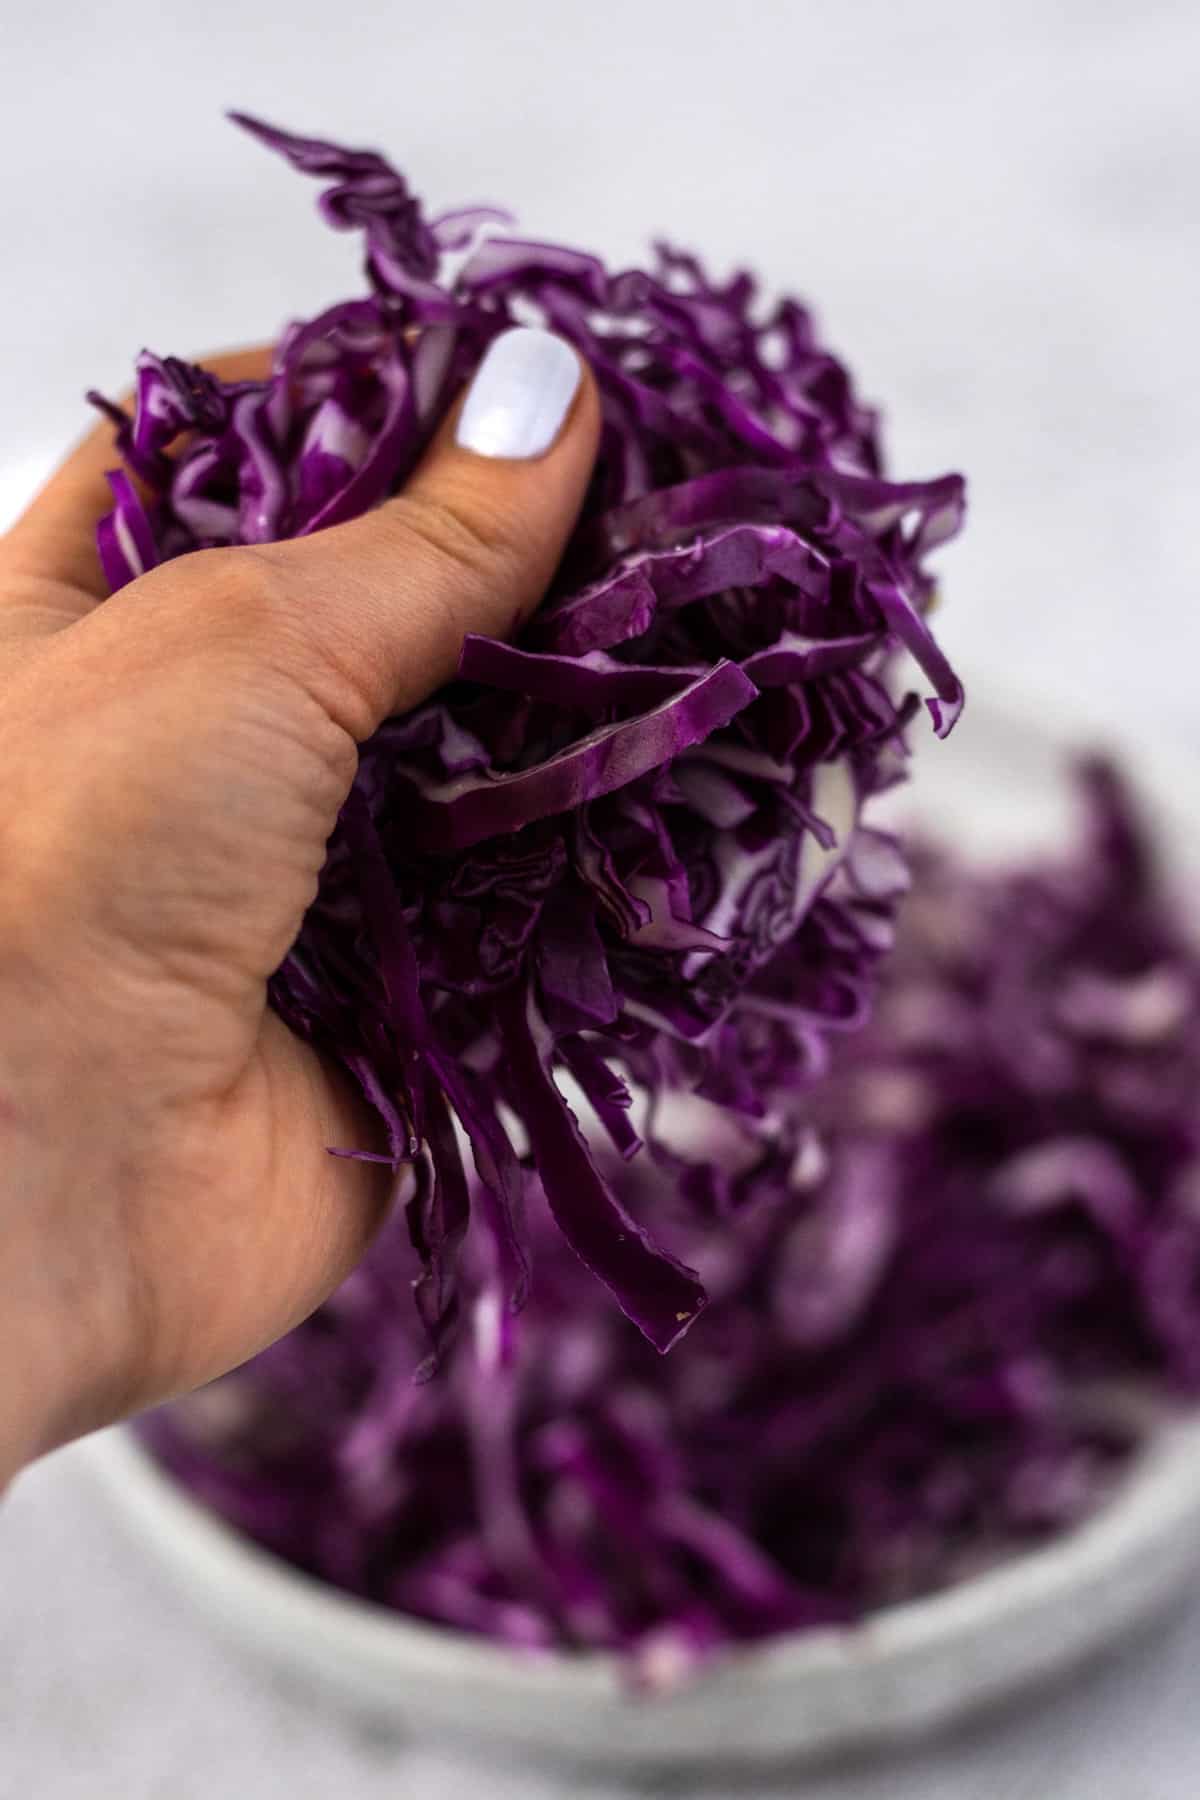 A hand massaging a bunch of shredded red cabbage over a bowl.